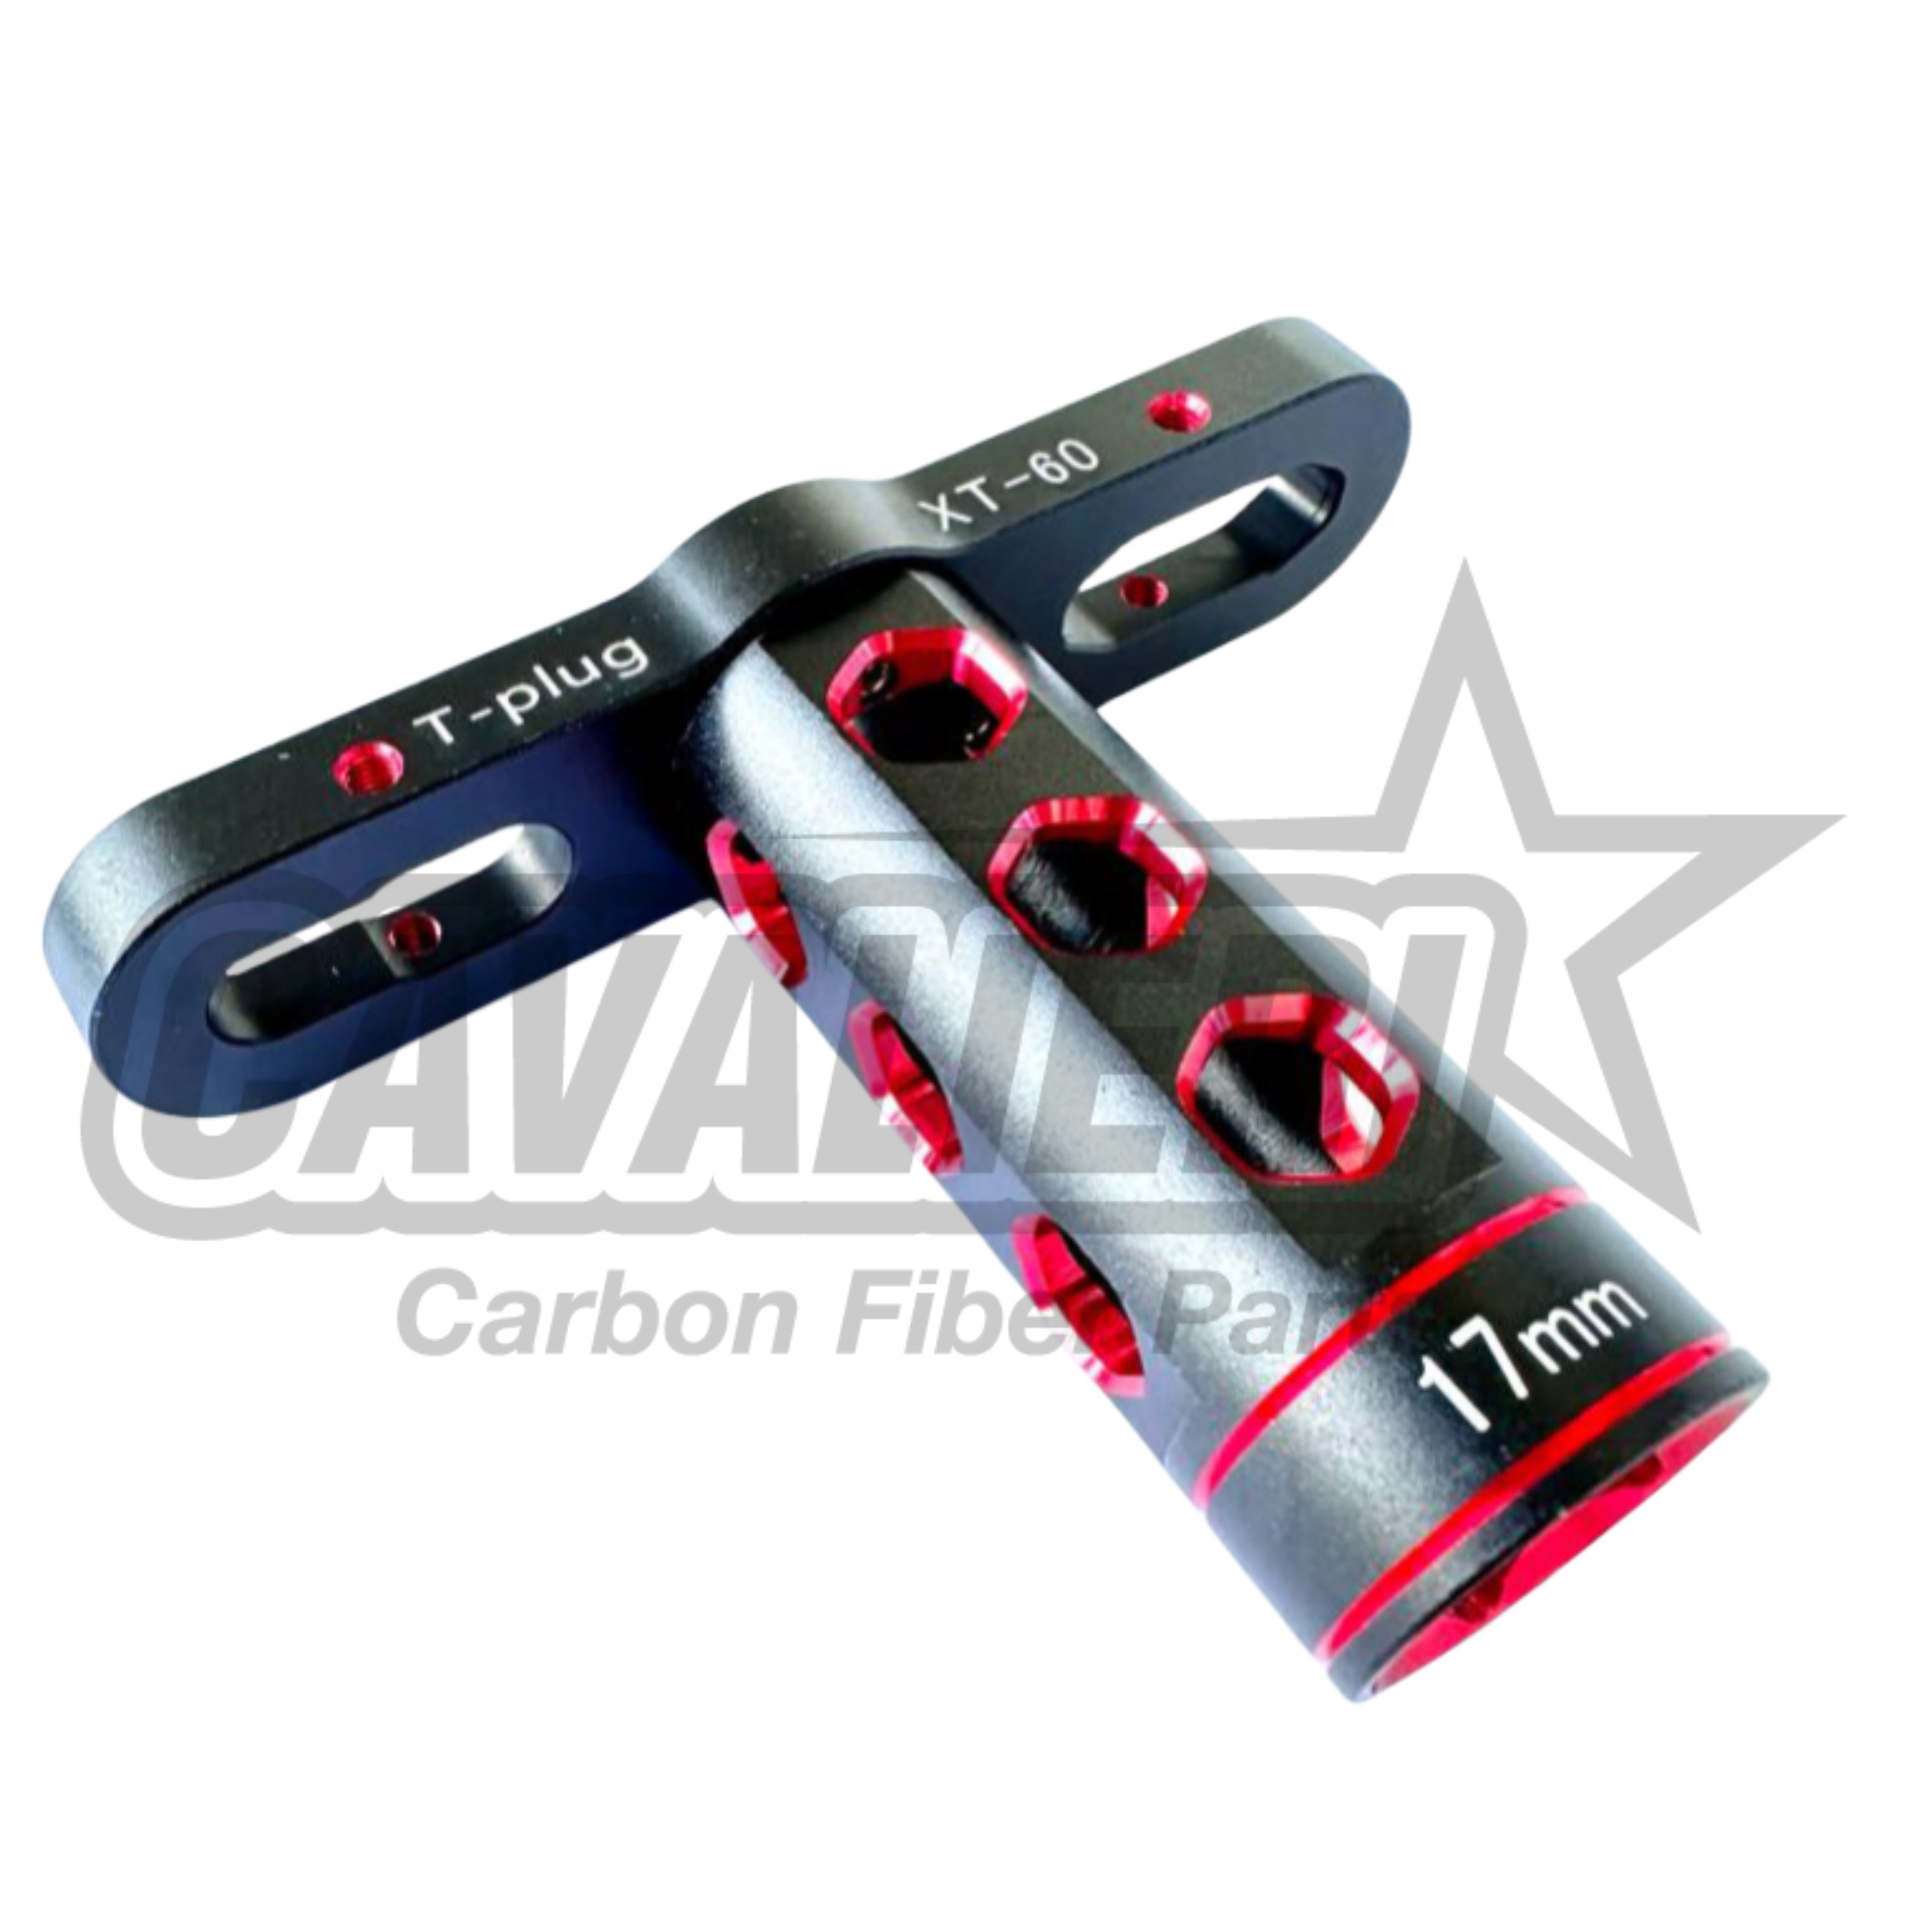 17mm Wrench- Red-Blue-Gold